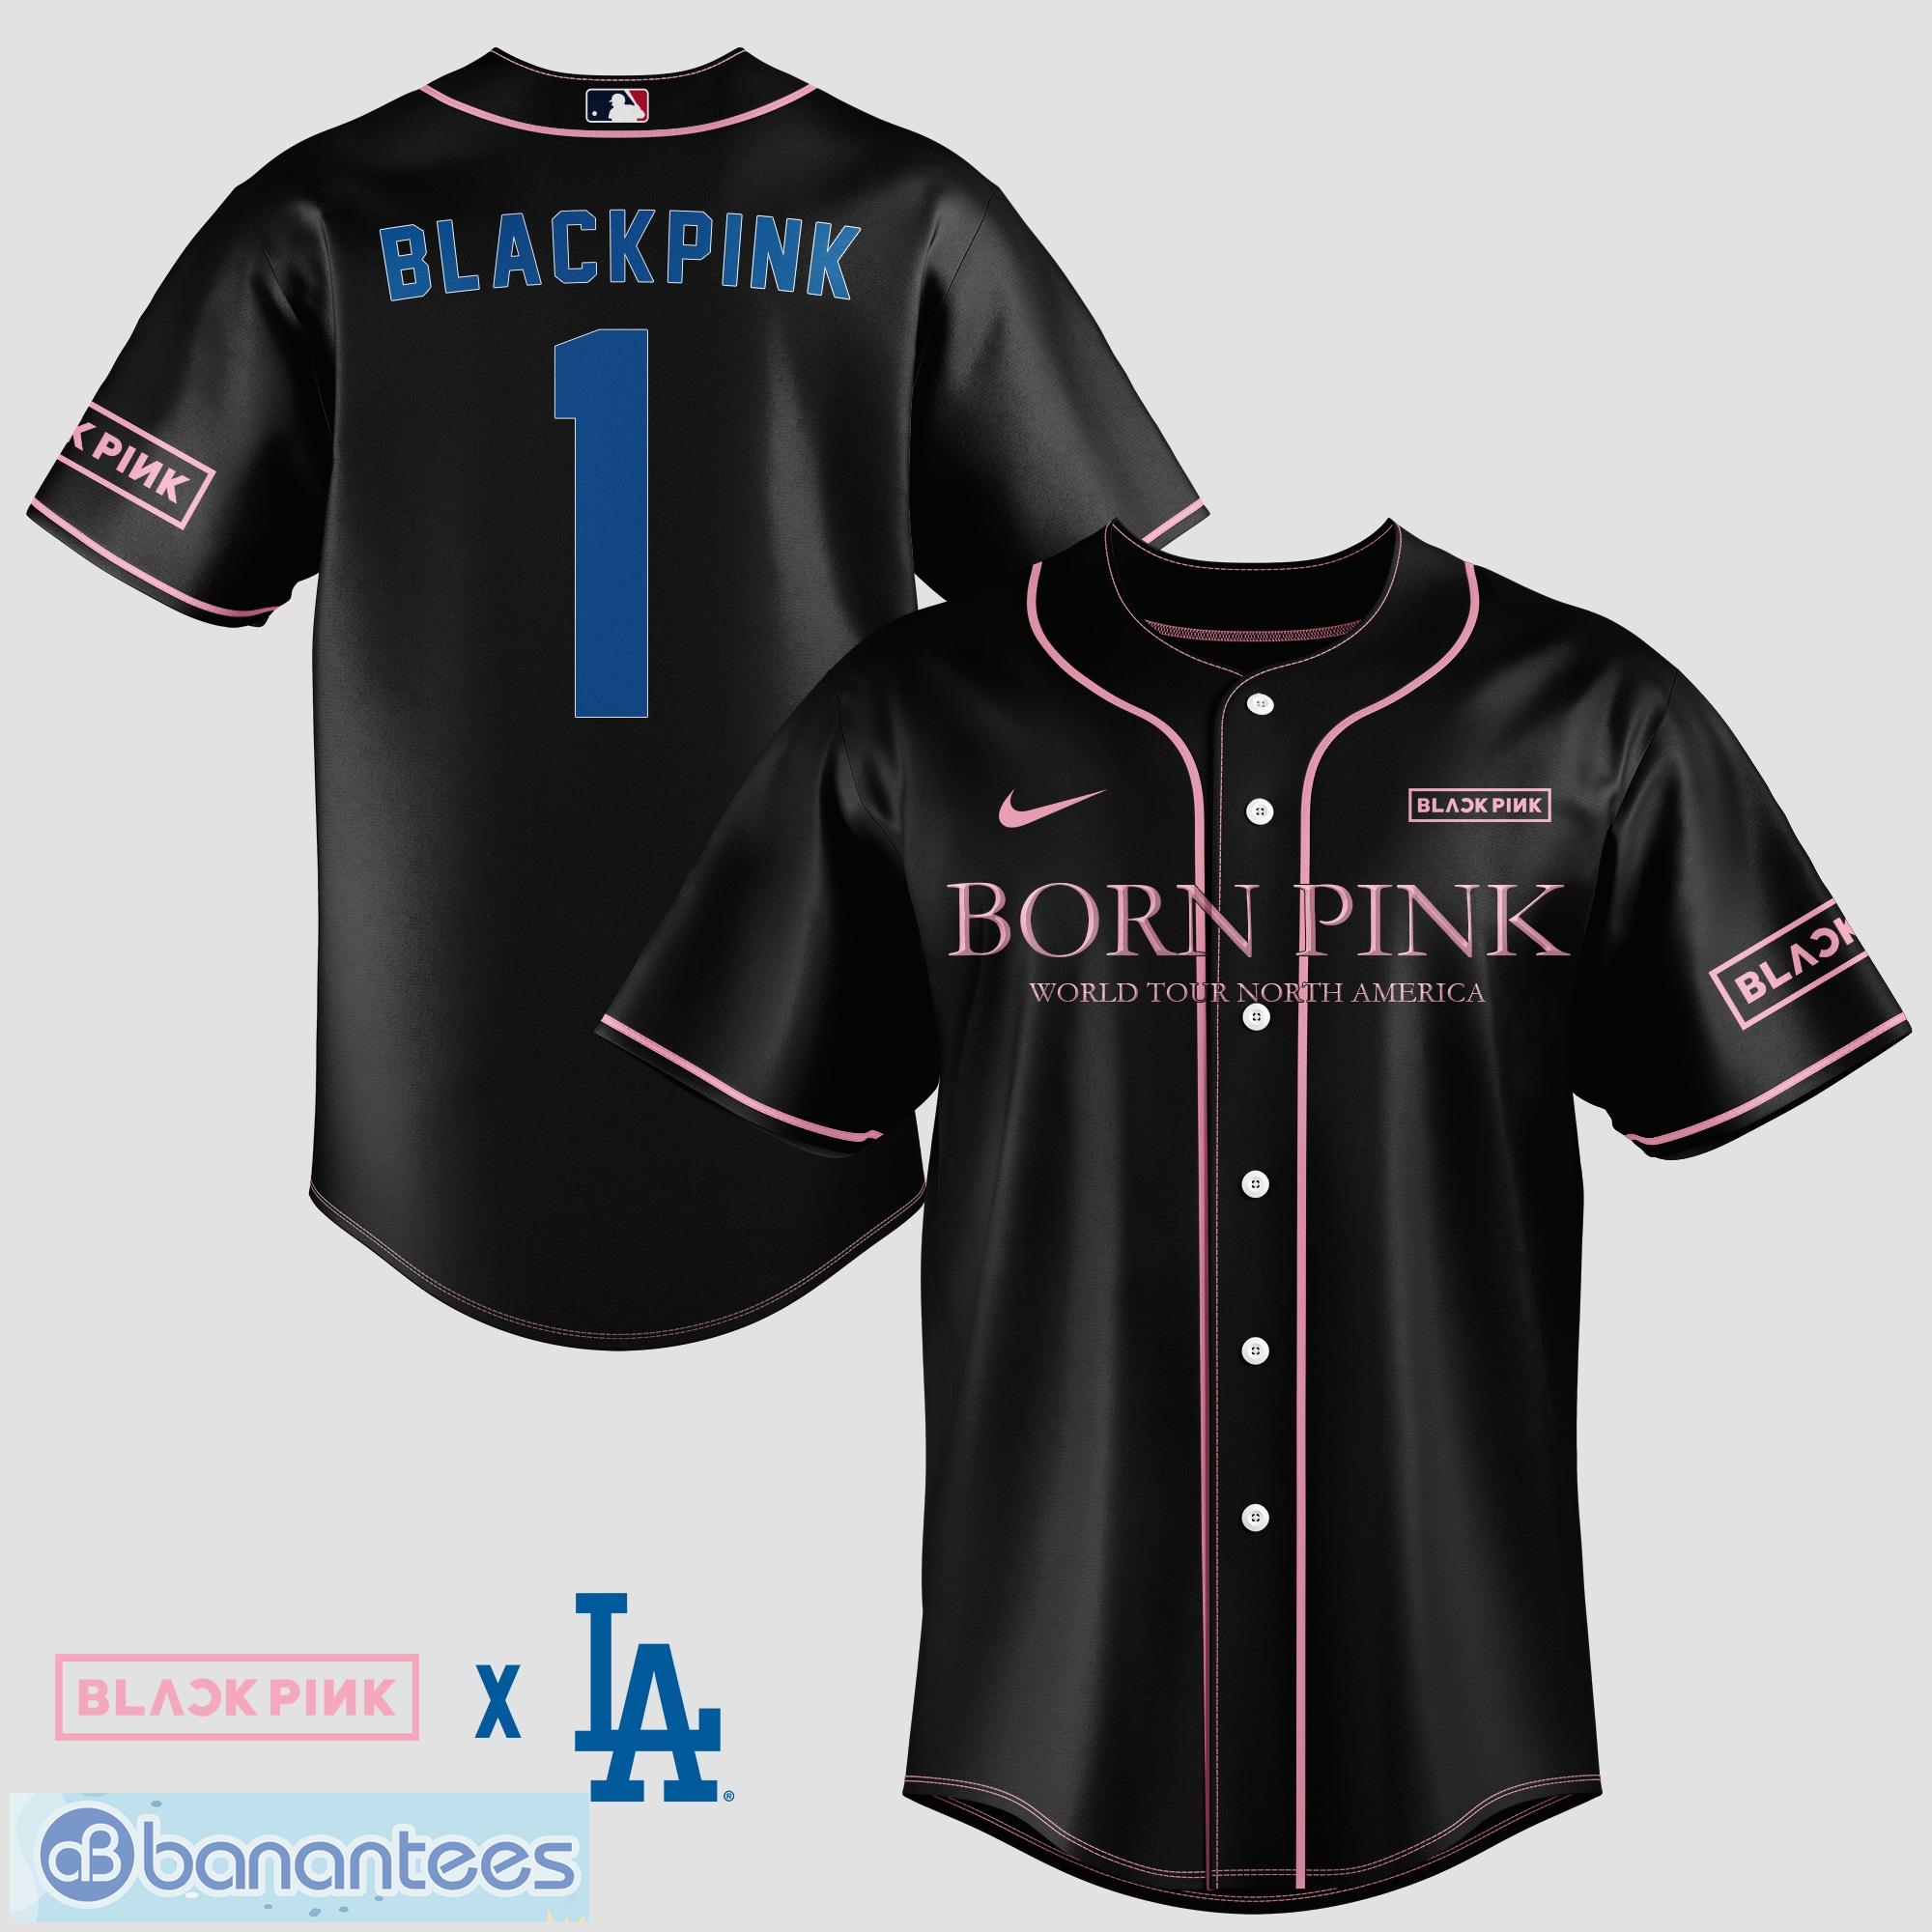  Pink Dodgers Jersey